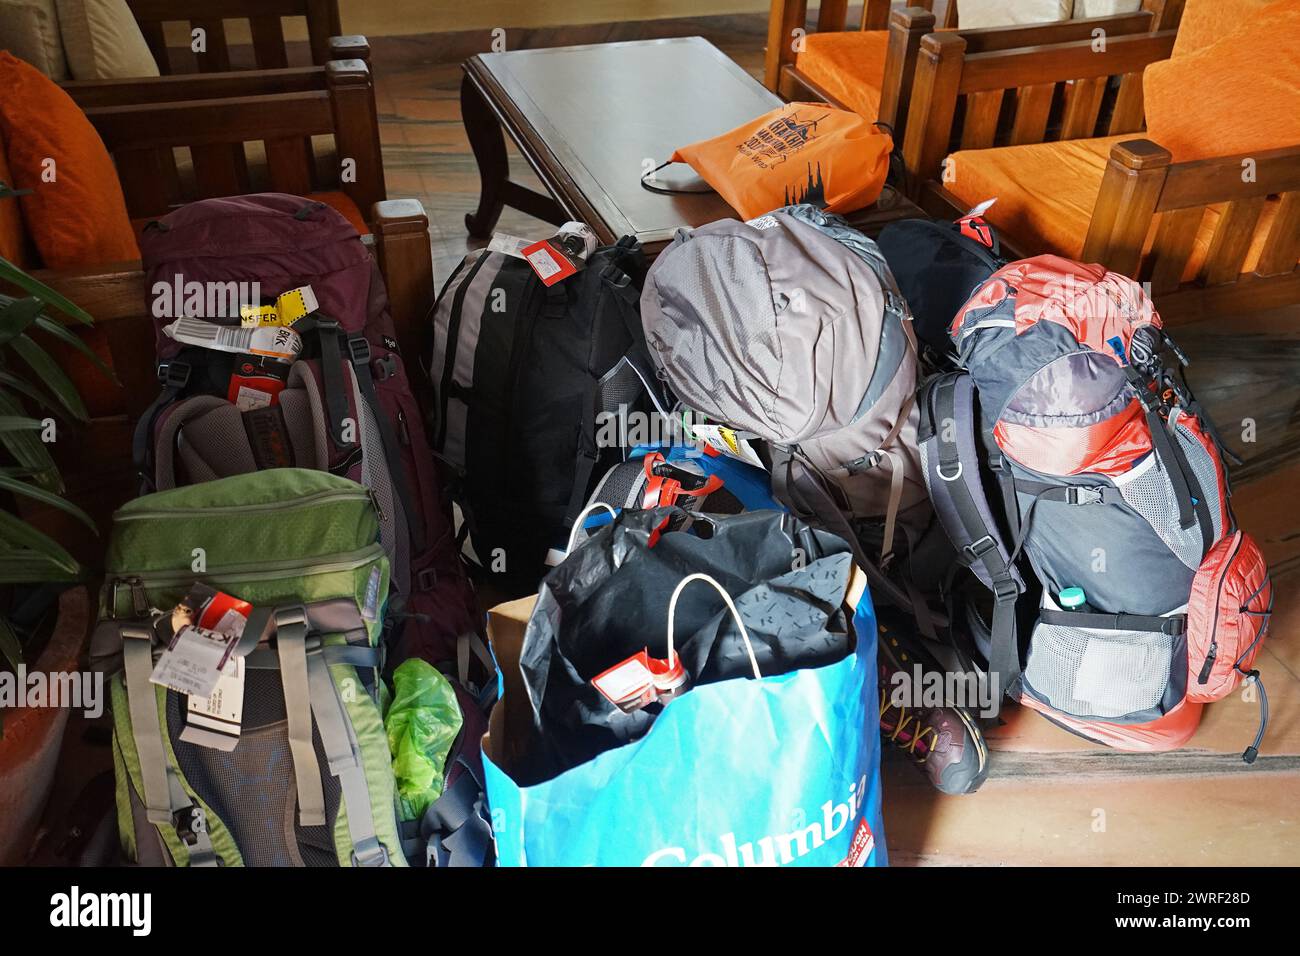 Stack of colorful backpacks and stuff on the ground- Pokhara, Nepal Stock Photo